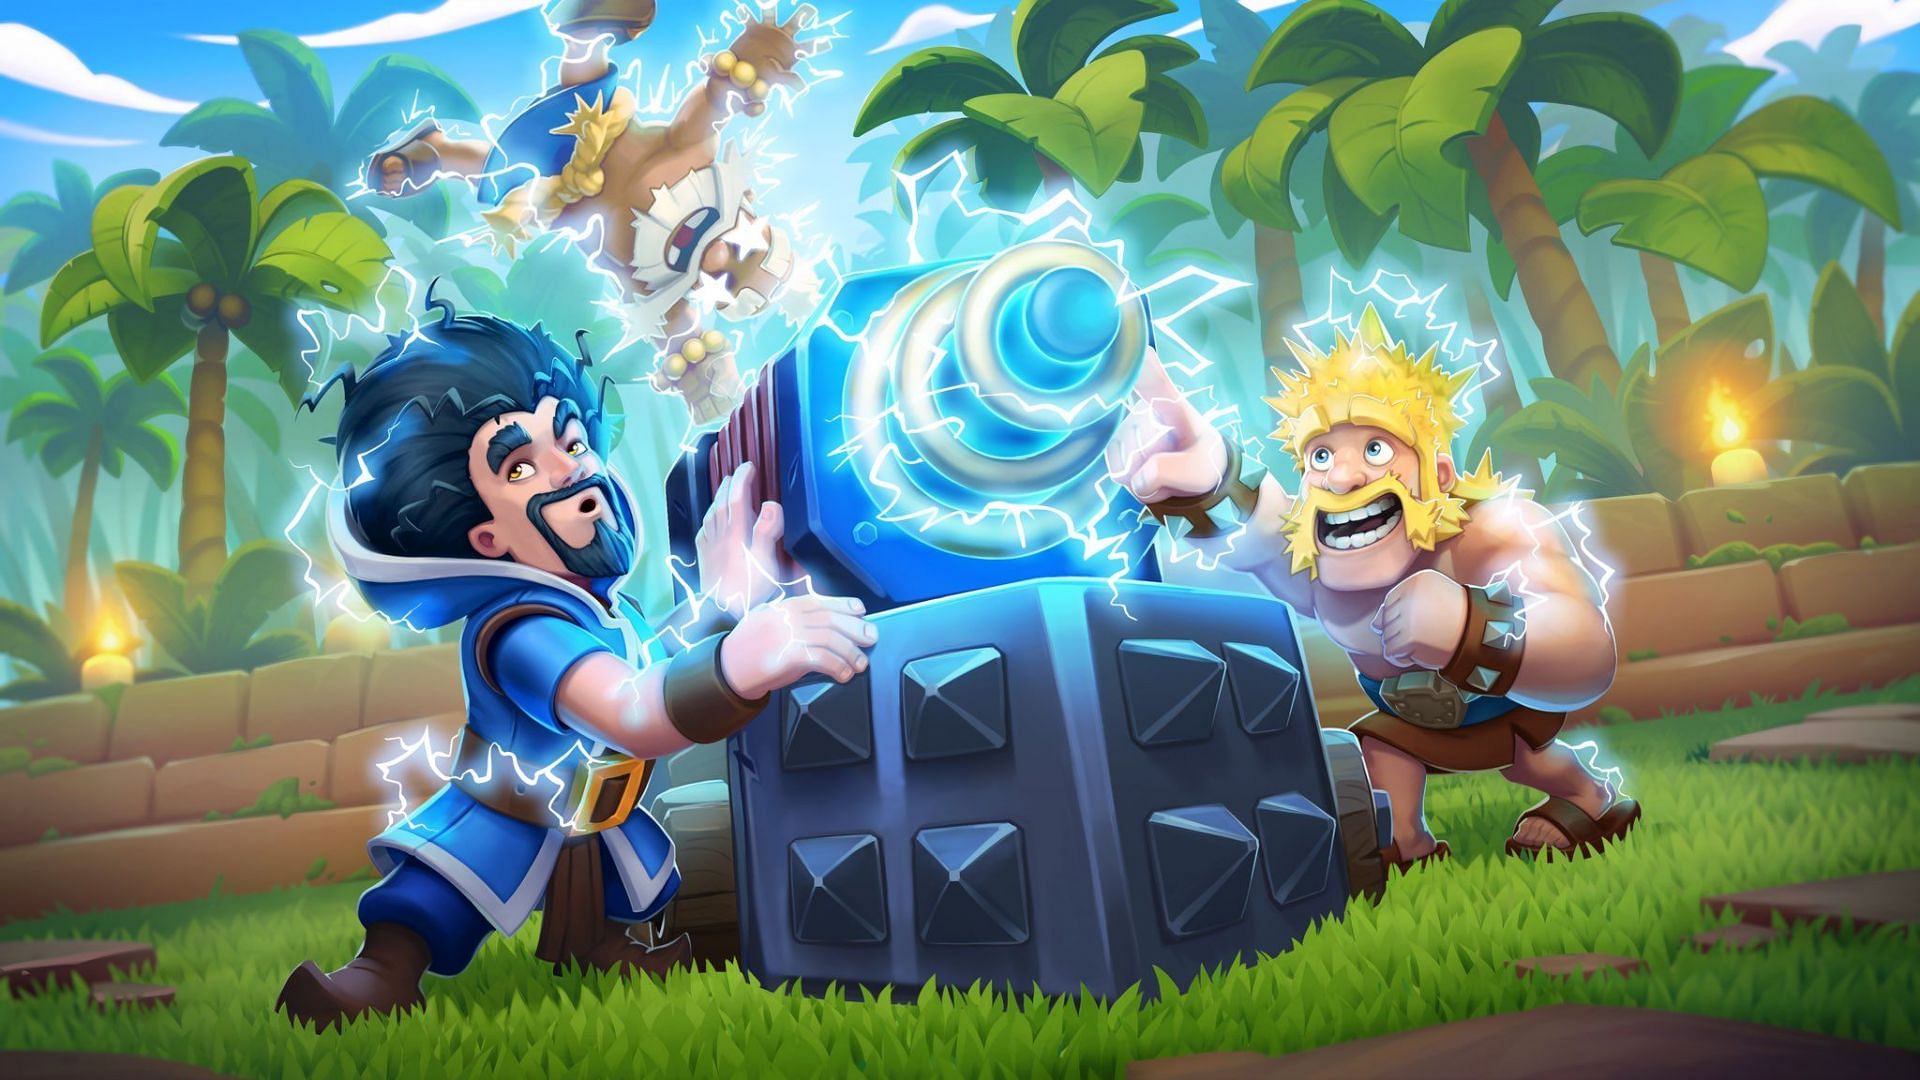 Sparky in the official game poster (Image via Supercell)